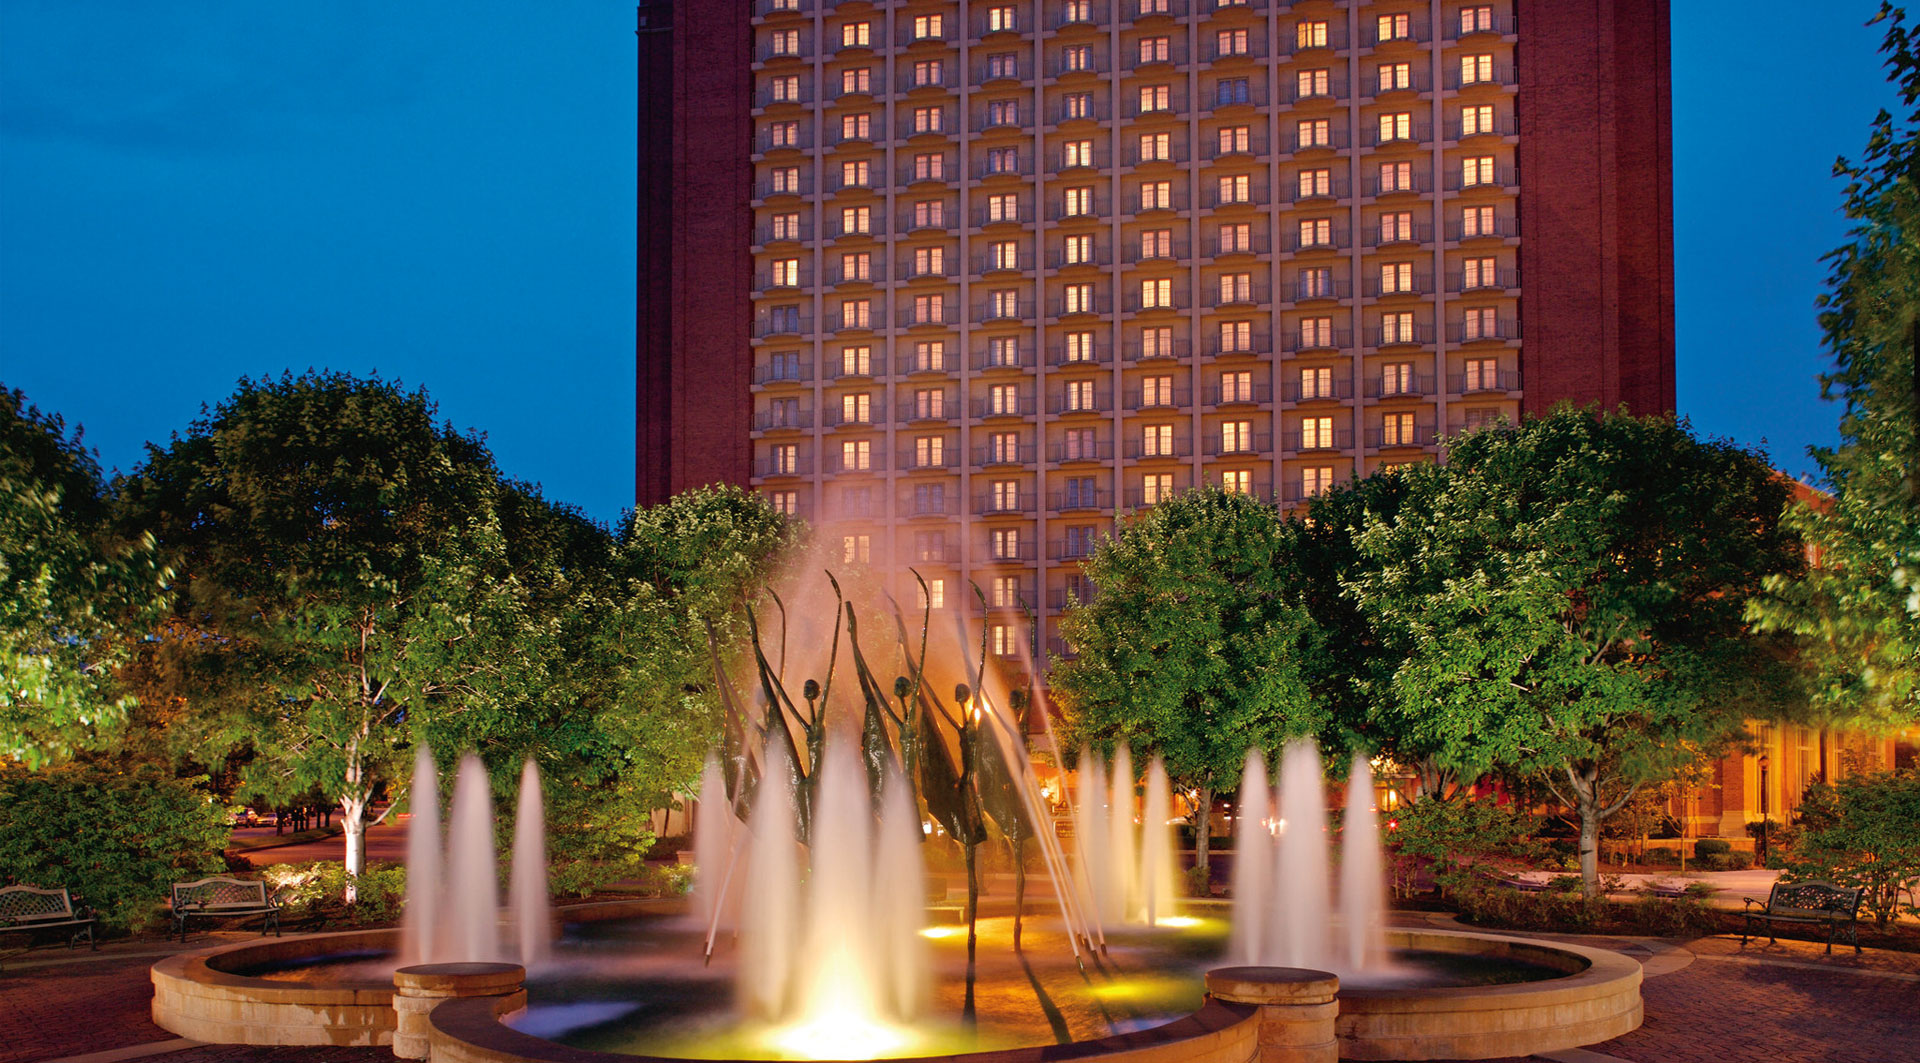 2020 NHL All Star Hotels in St. Louis, MO. Luxury Hotels.1920 x 1063